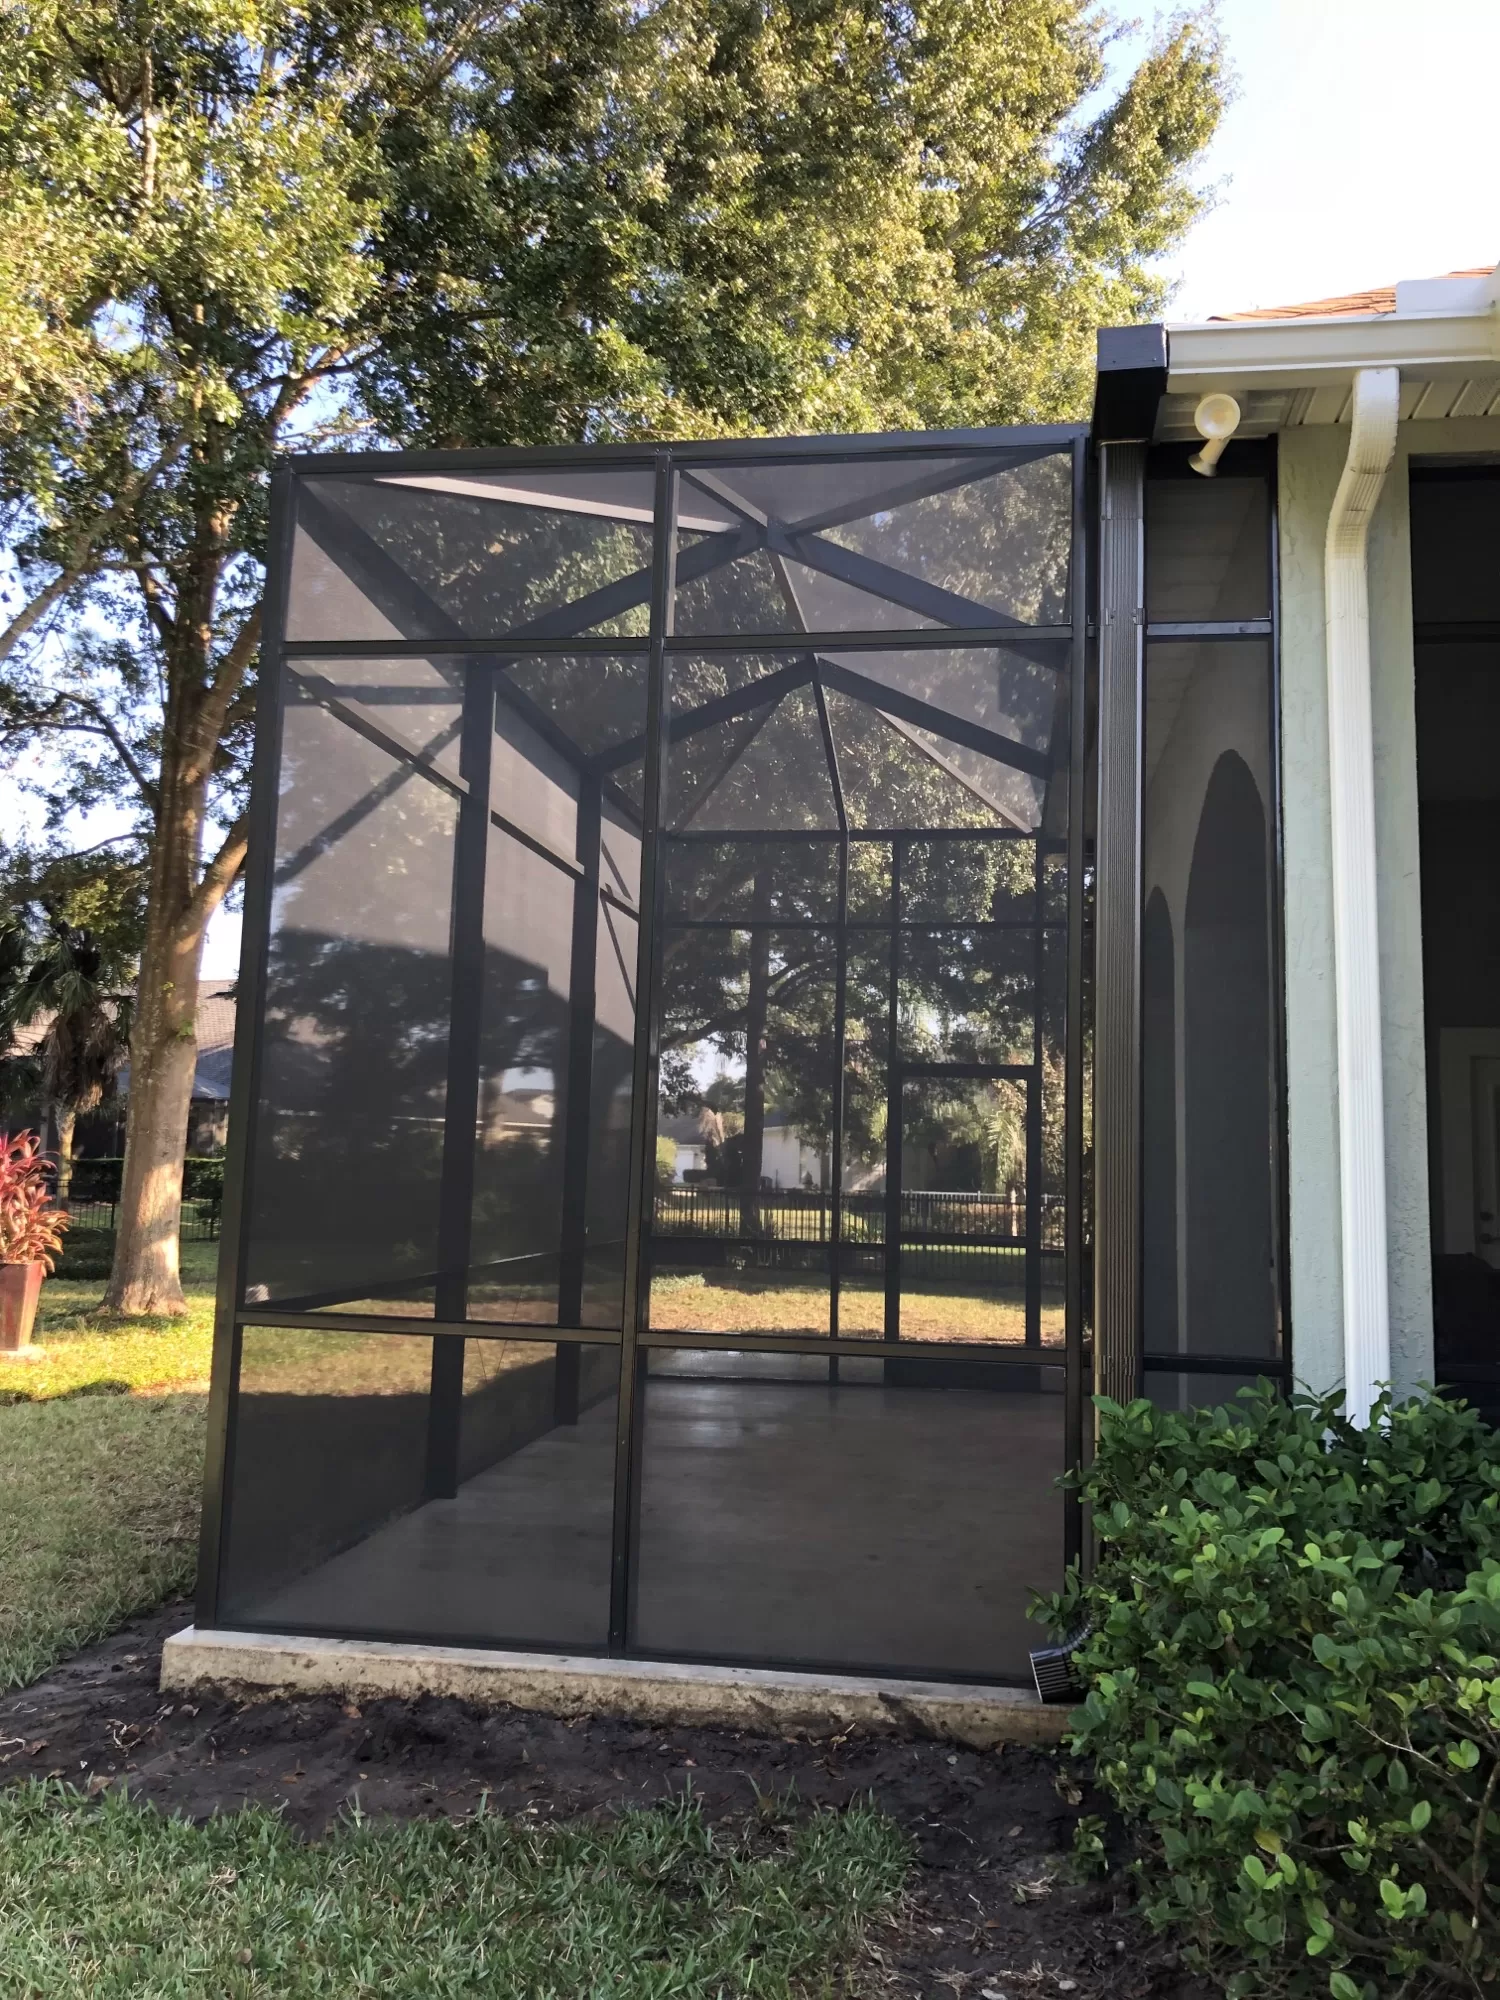 This custom bird cage build extends the homeowners patio and provides protection from insects, dirt and debris.